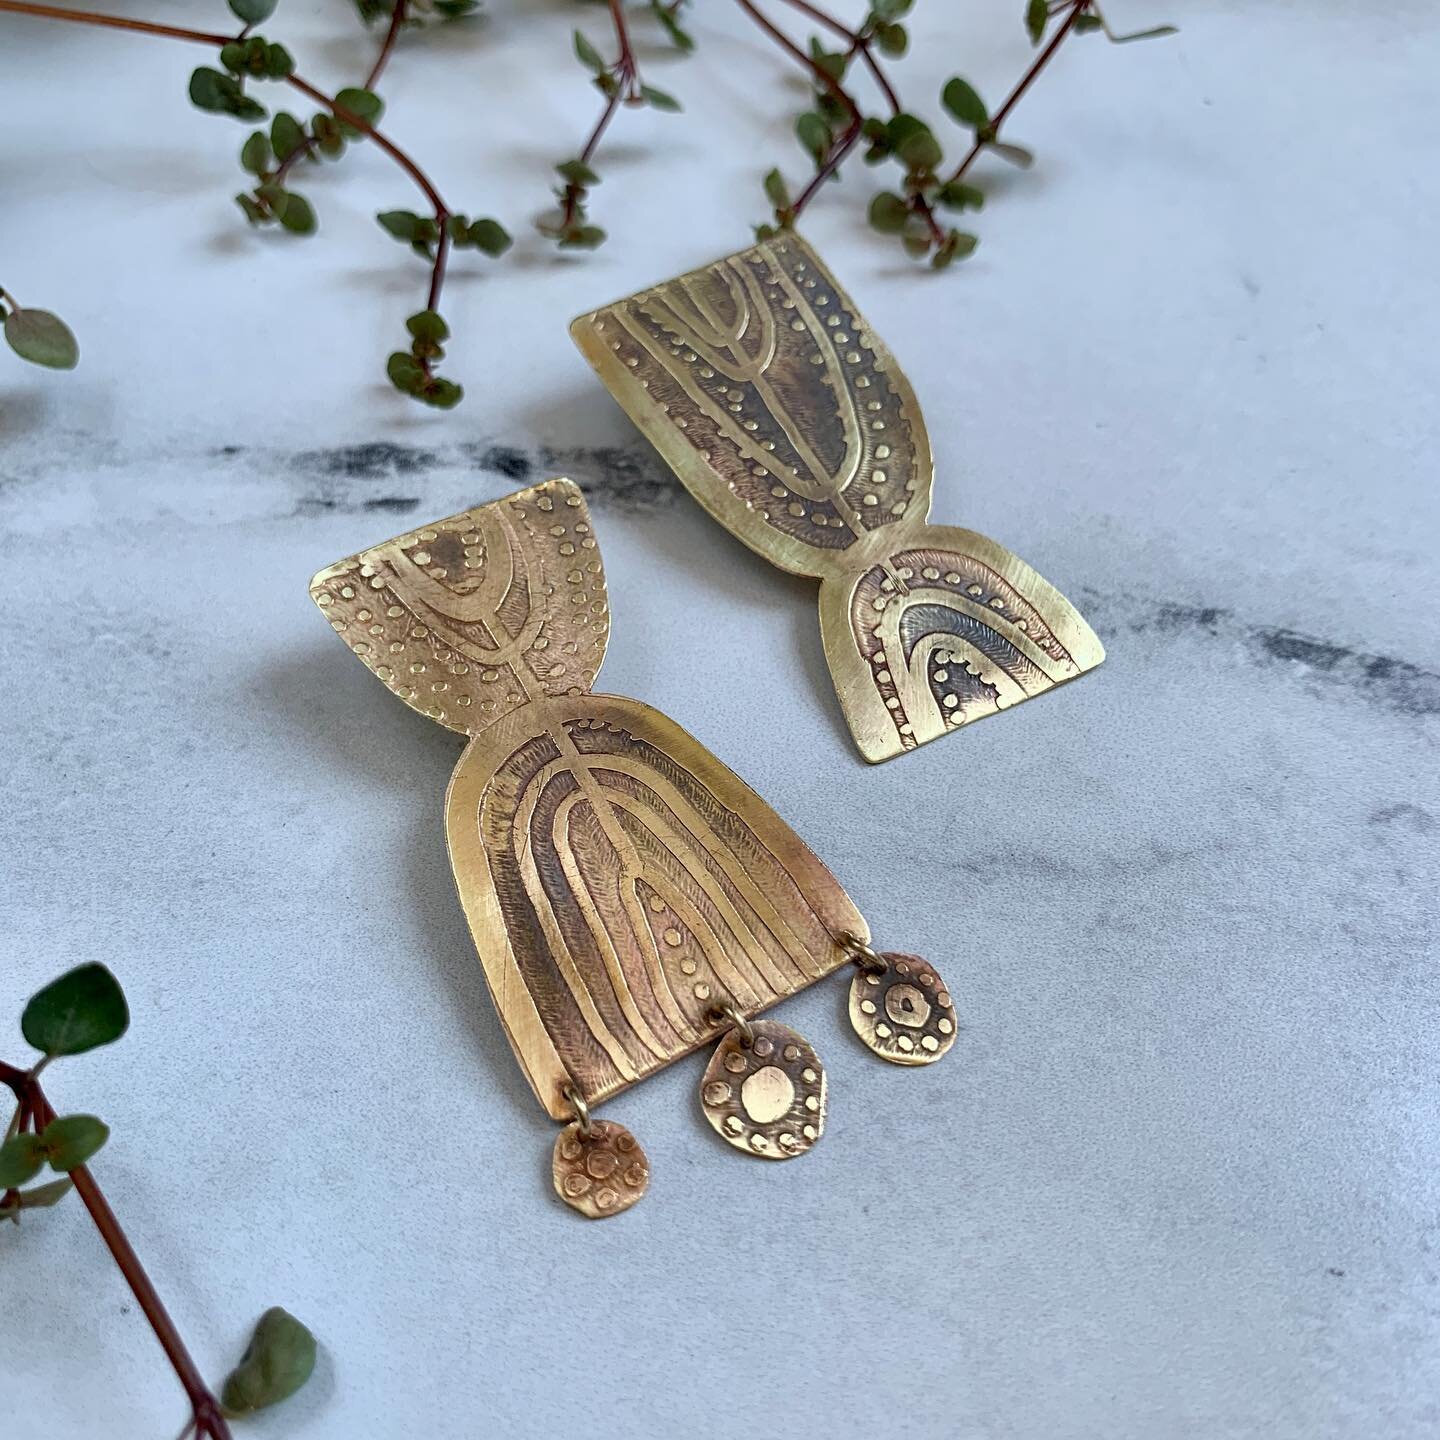 I hope you&rsquo;re having a nice holiday weekend 💥 there are still some etched earrings from last week&rsquo;s update, in case you need a summer pick me up after the long weekend 🌚